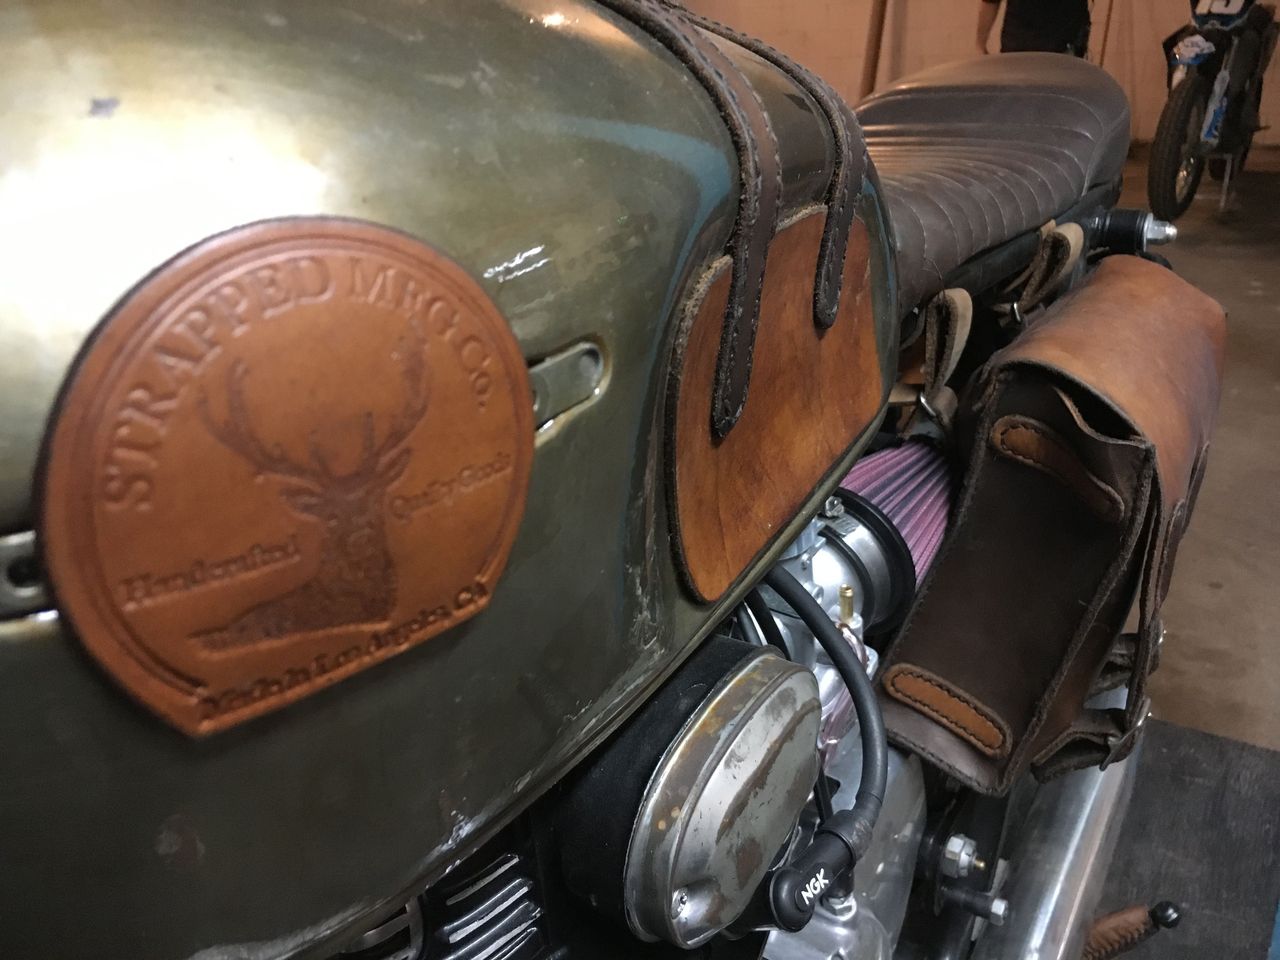 The use of leather on this custom Honda made it truly unique. The seat, grips, tank badge, knee-guards, tool bag, shift lever and even the kickstand all were made of leather or used leather accents